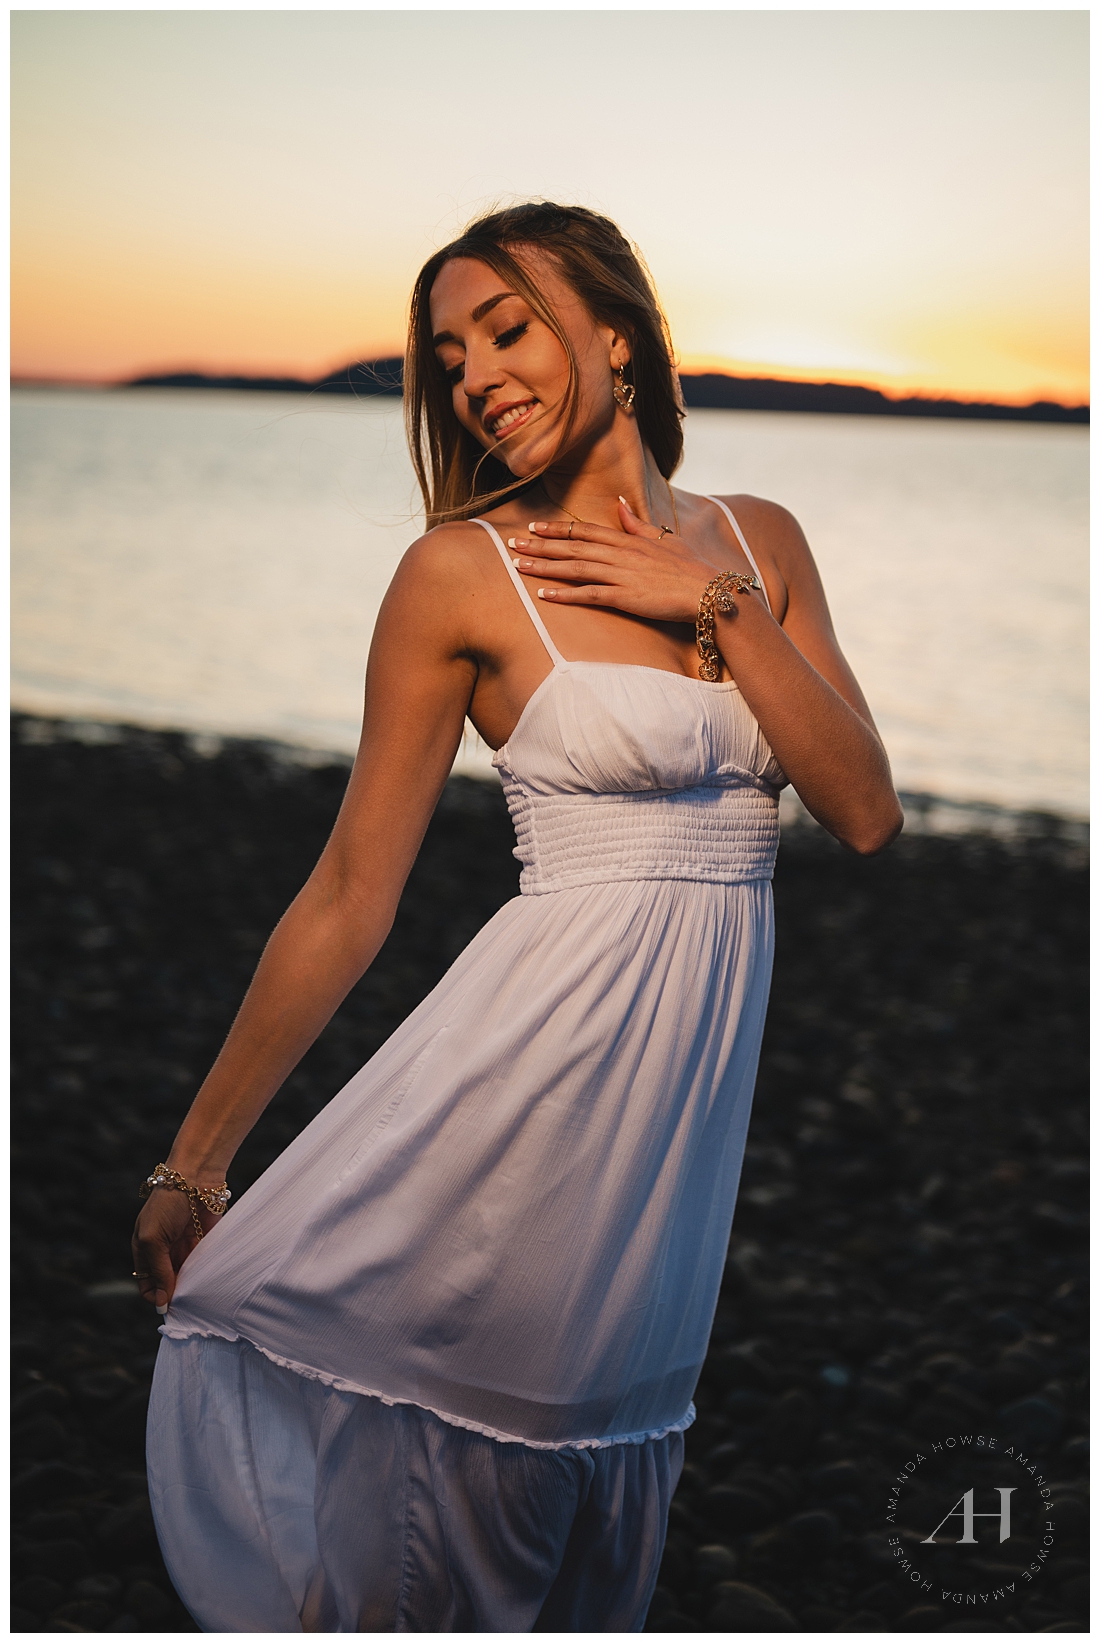 Golden Hour Sunset Beach Portraits at Chambers Bay | PNW Senior Portraits with the Best Senior Photographer, Amanda Howse Photography 